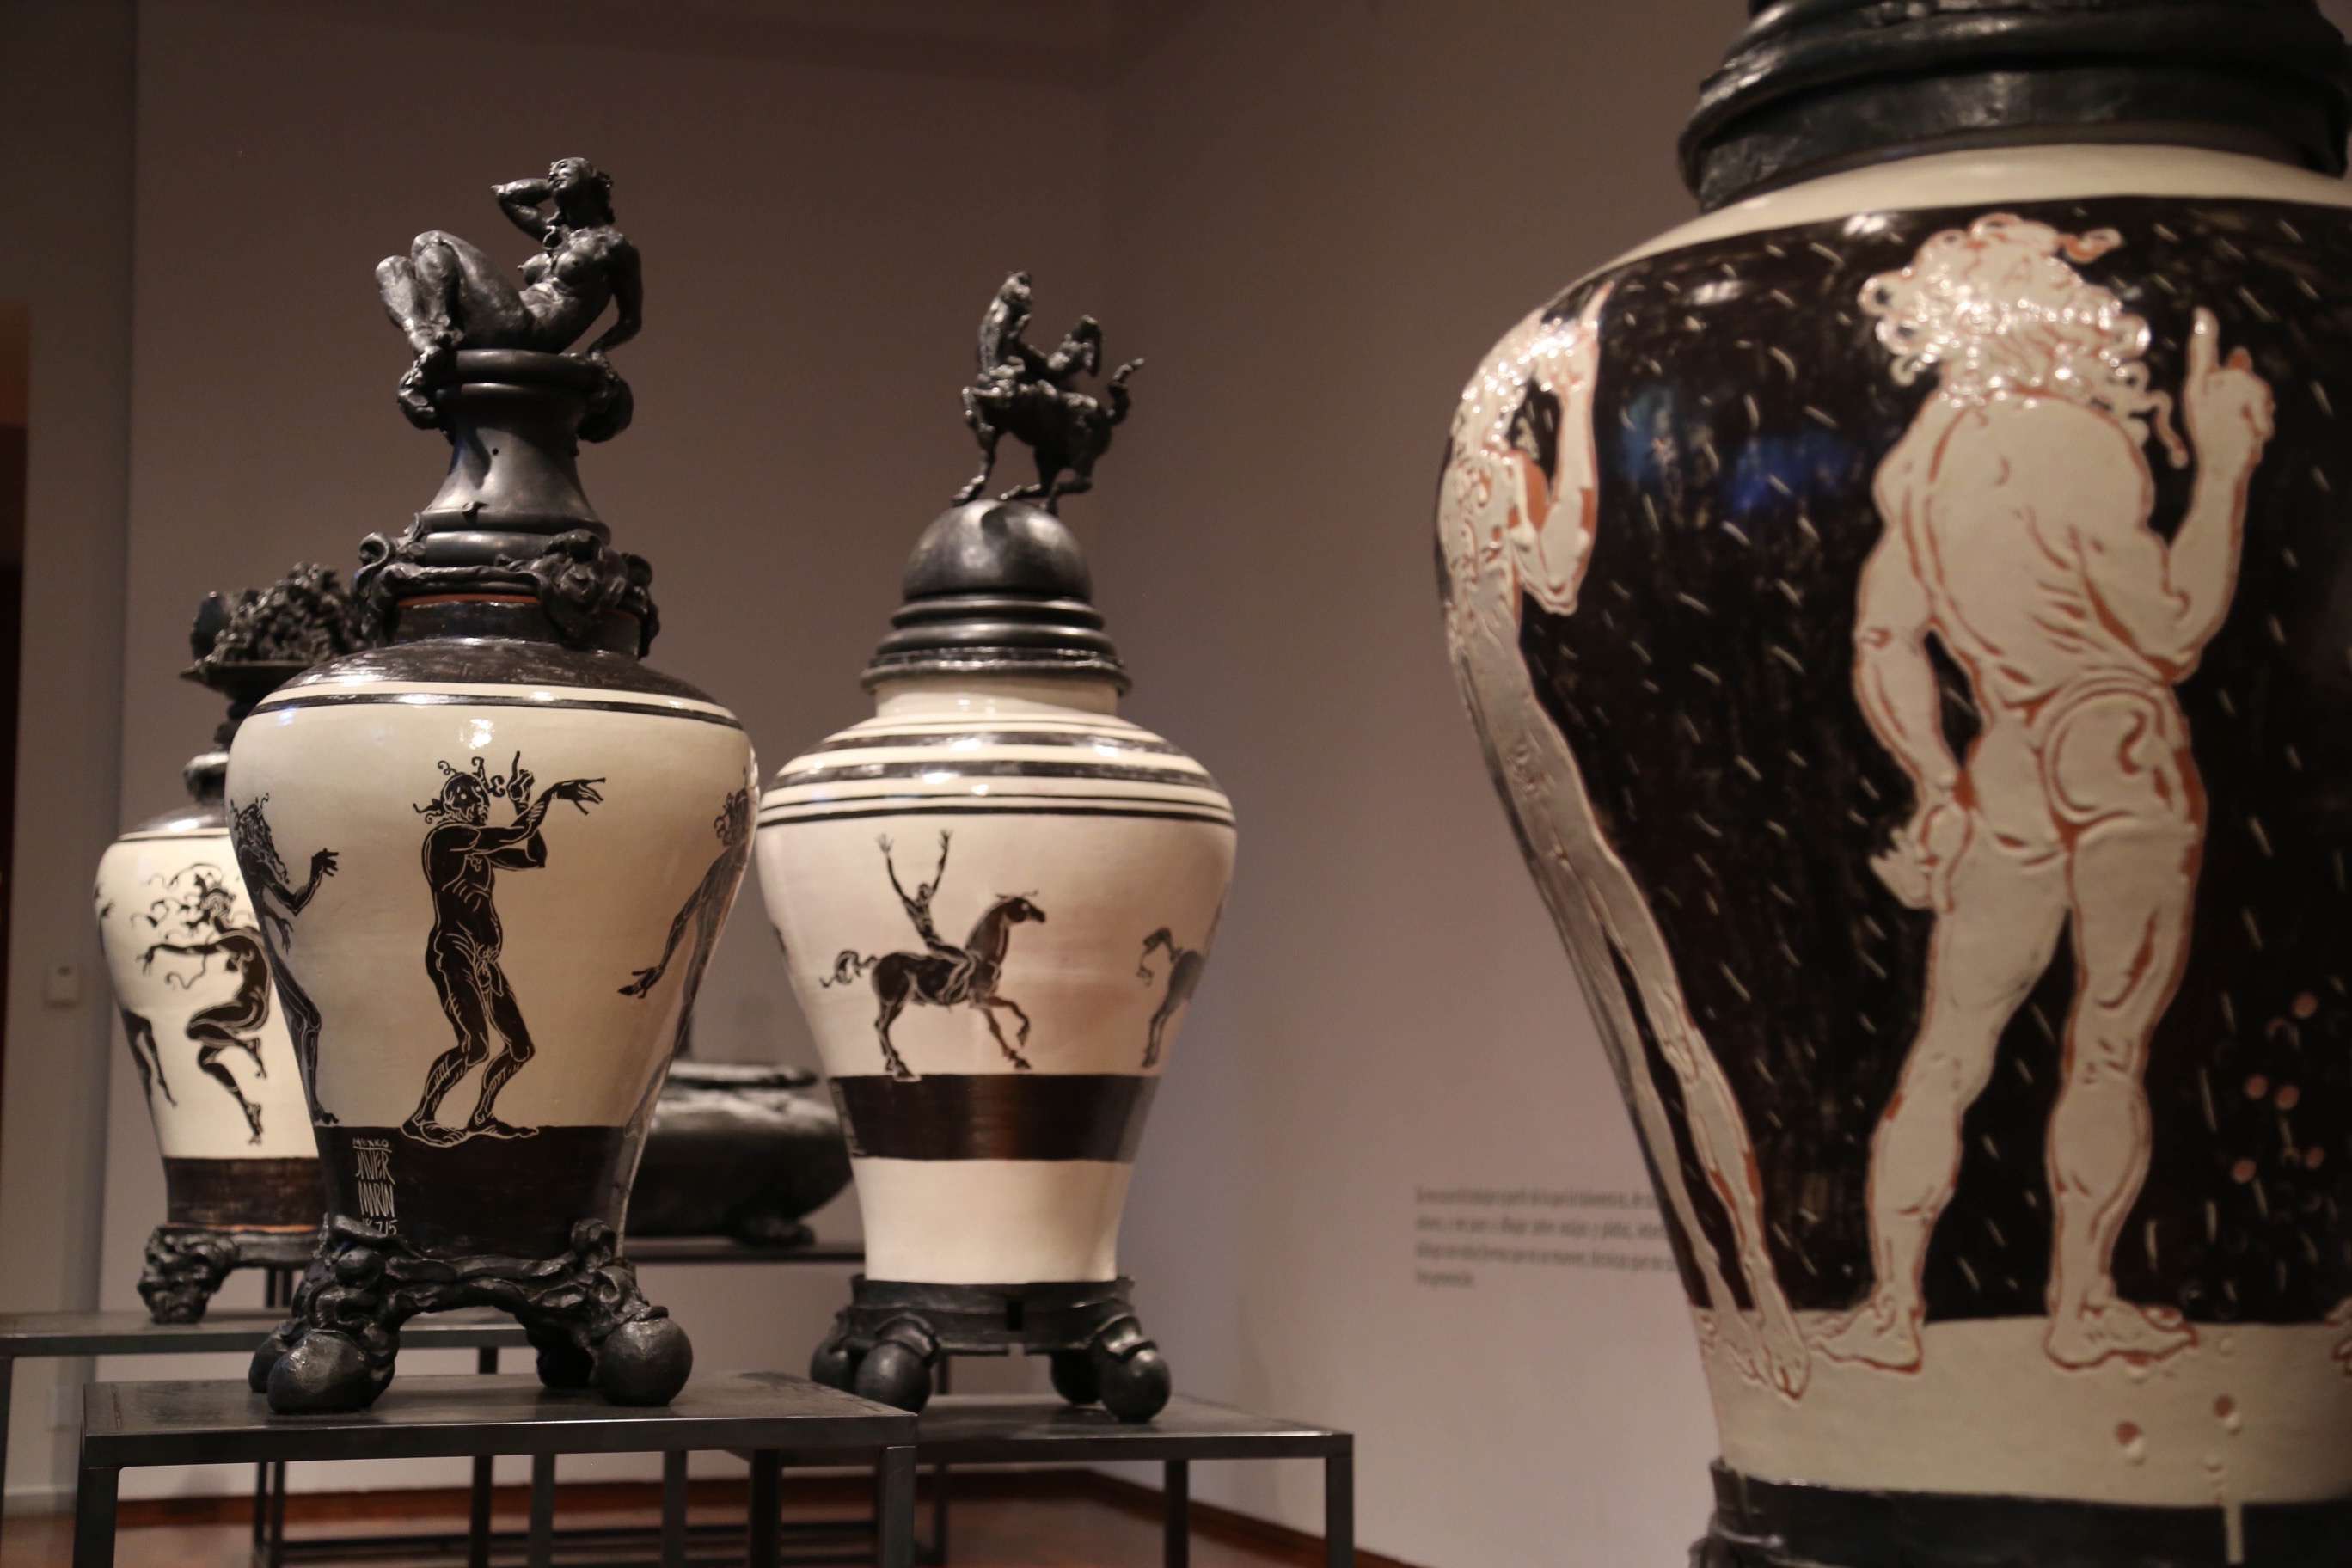 A series of ceramic vases by Javier Marin suggest a time of ancient Rome.